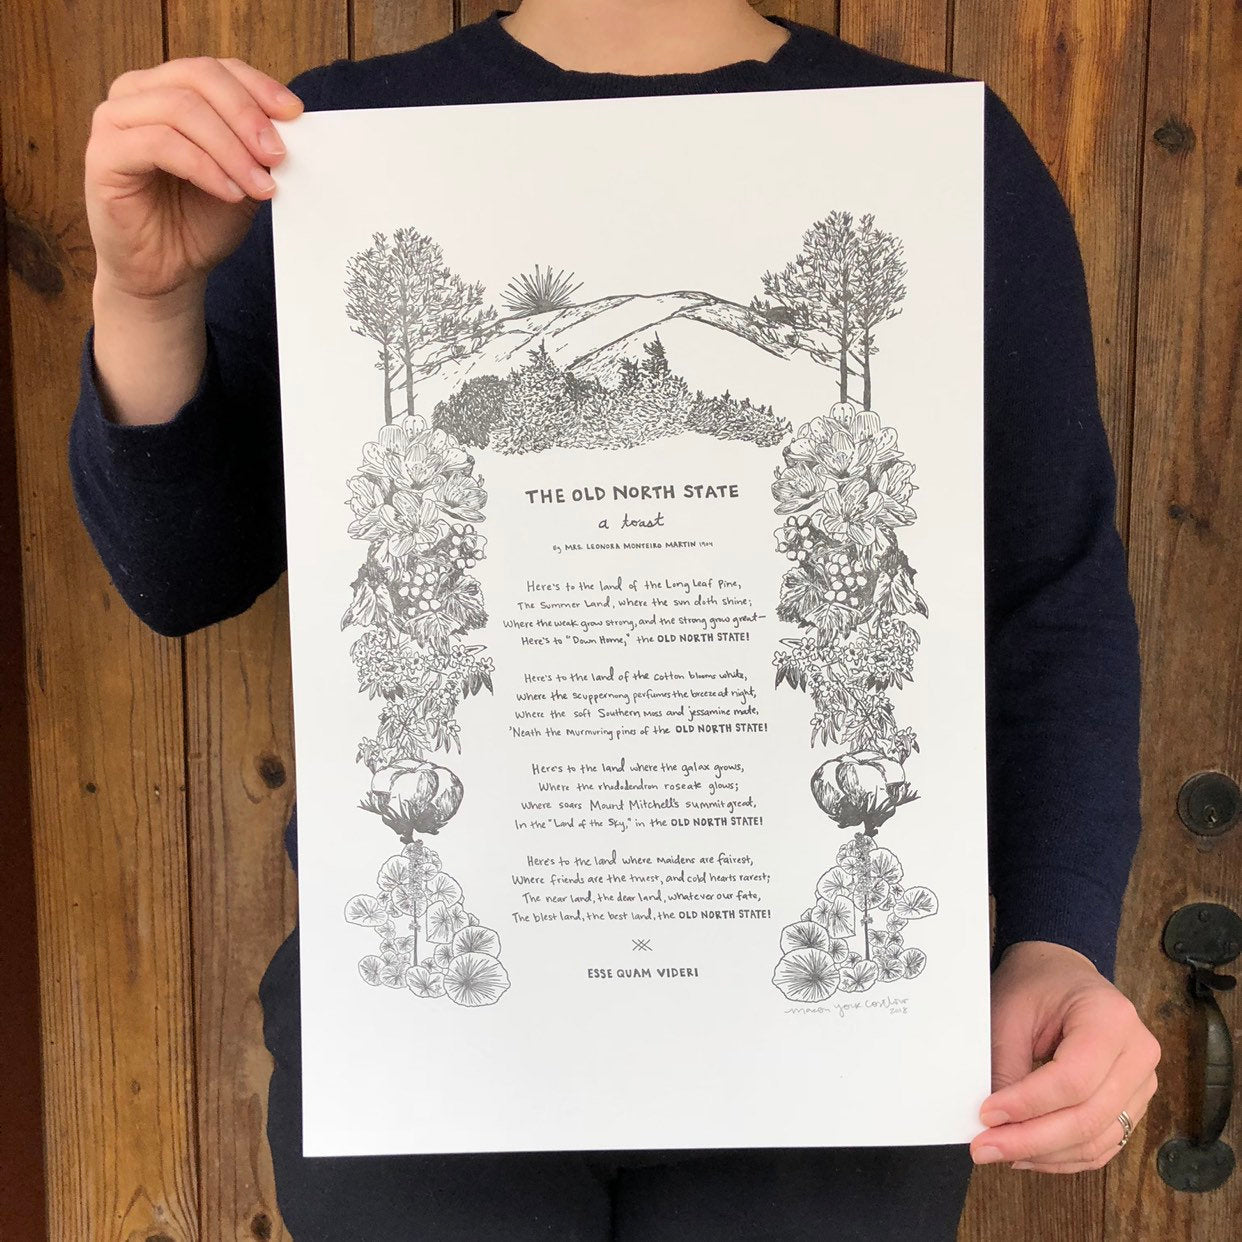 Large letterpress art print featuring "The Old North State," an ode to North Carolina and all her natural beauty, written in 1904 by Mrs. Leonora Monteiro. Macon York has hand-written the entire toast in her whimsical style. All the native plants in the toast are hand-drawn to create a border around the text.  The artist, Macon, is shown holding the print - a zoomed in shot of just the print and her hands. 